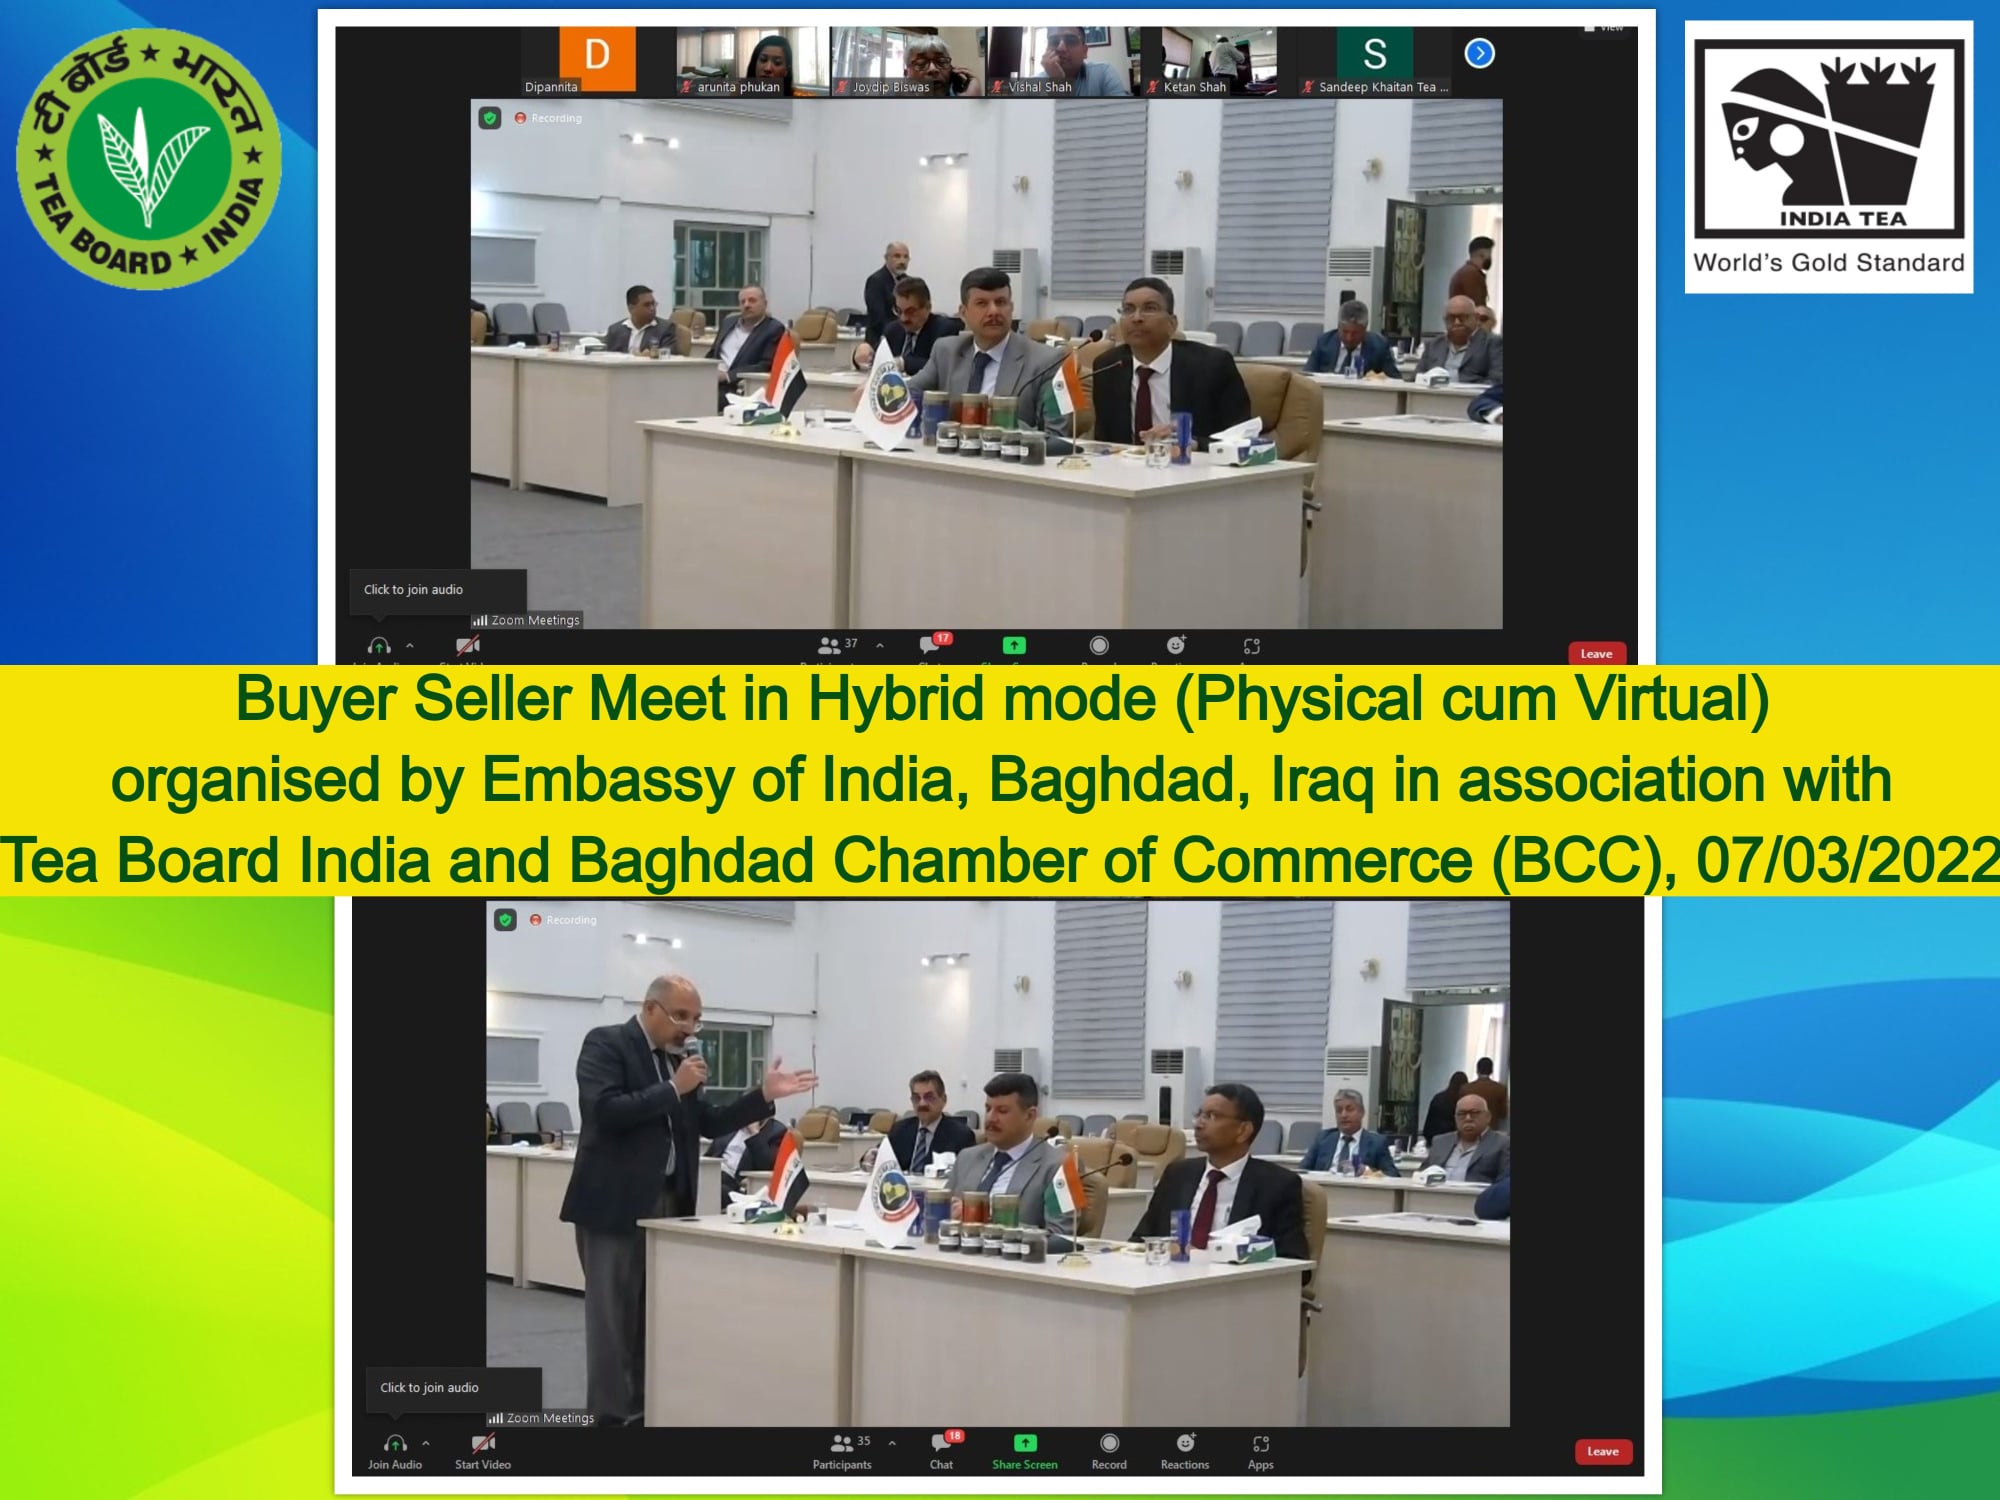 Buyer Seller Meet in Hybrid mode (Physical cum Virtual) organised by Embassy of India, Baghdad, Iraq in association with Tea Board India and Baghdad Chamber of Commerce, 07-03-2022